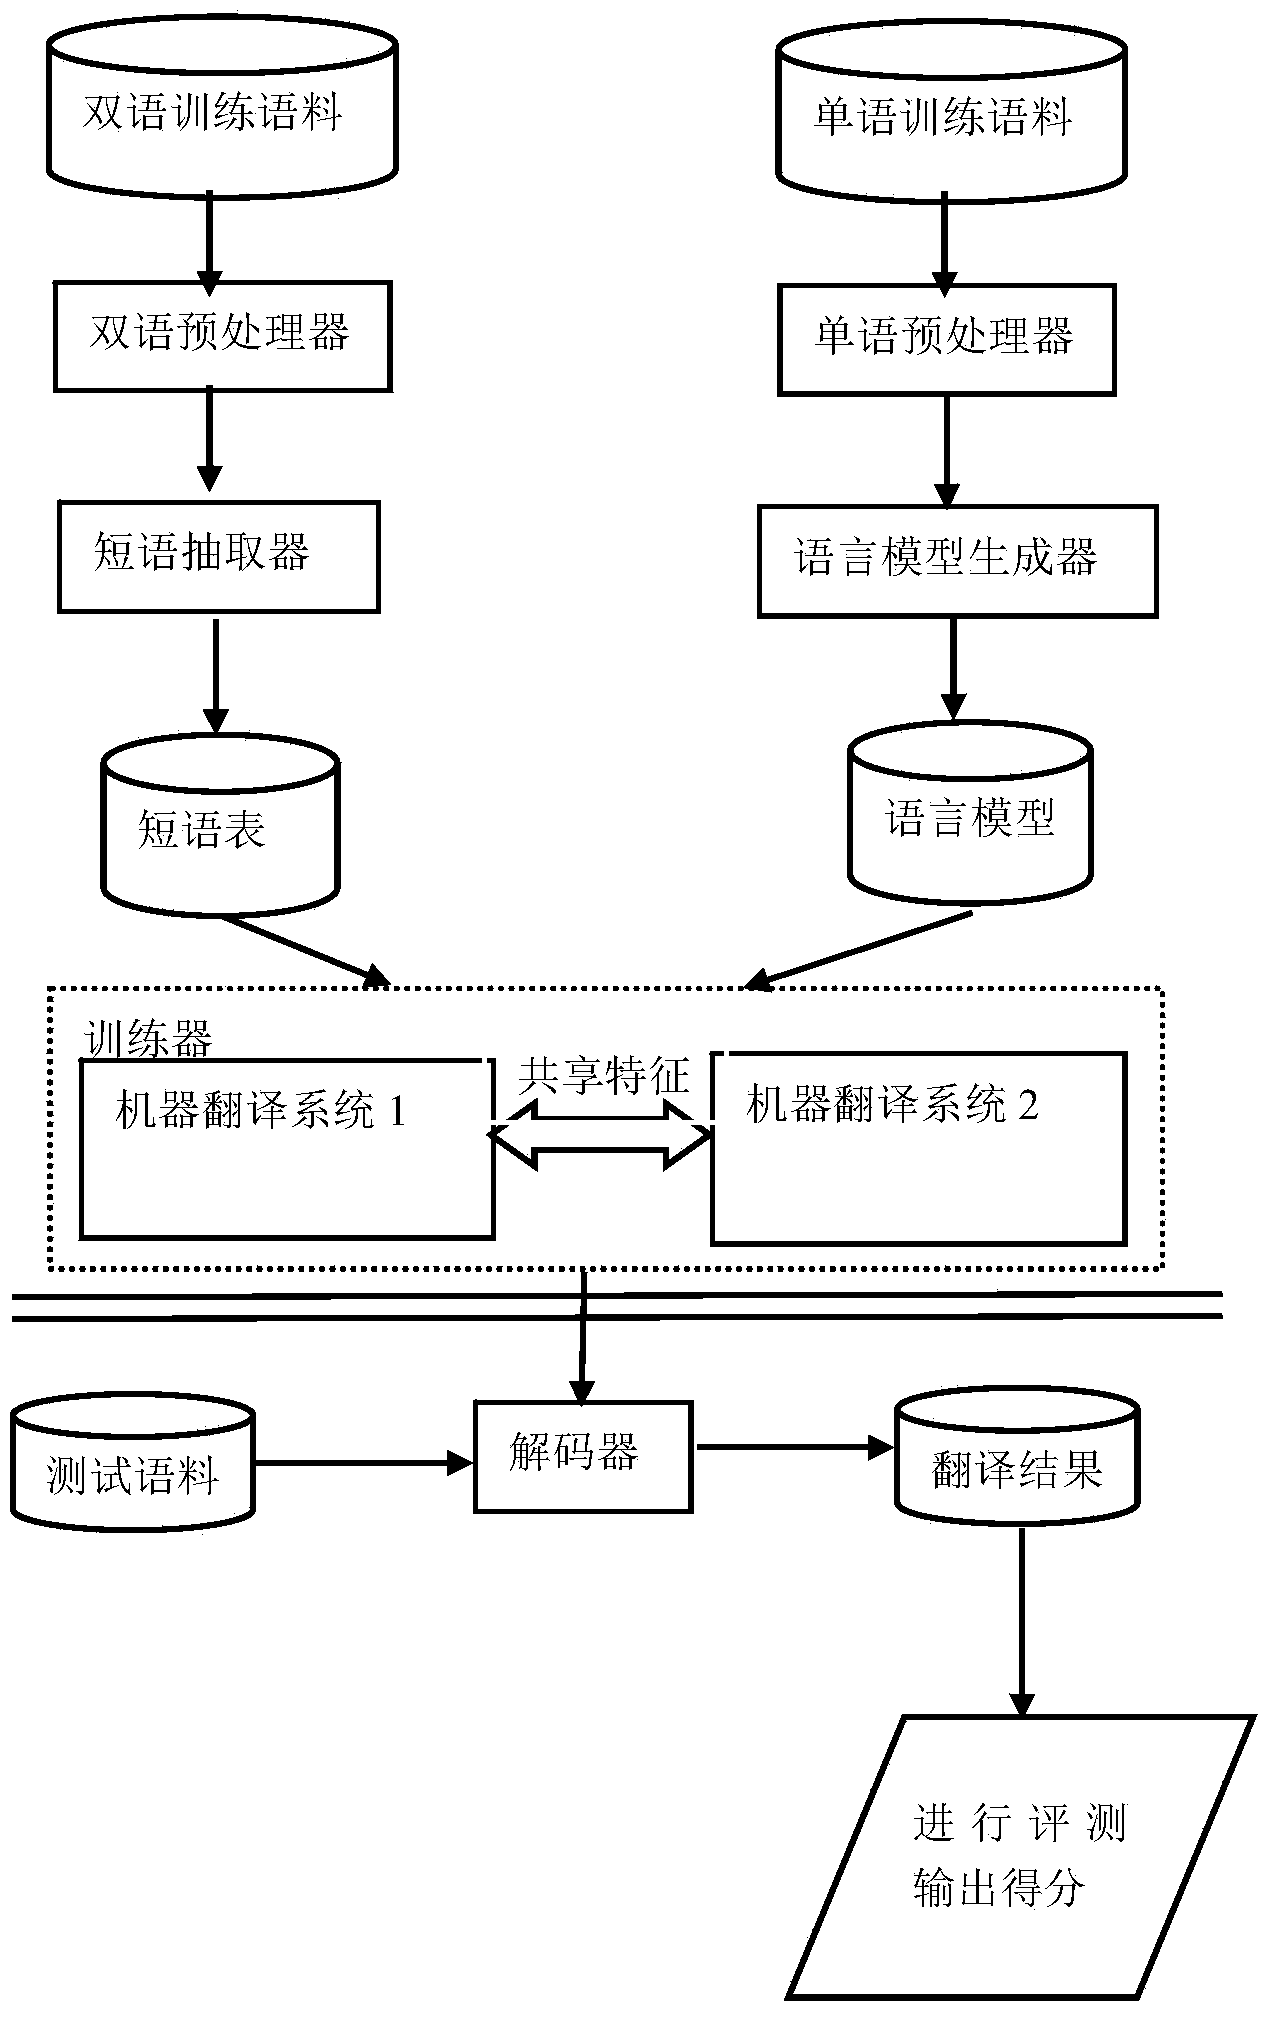 Method and device for fusing multiple machine translation systems